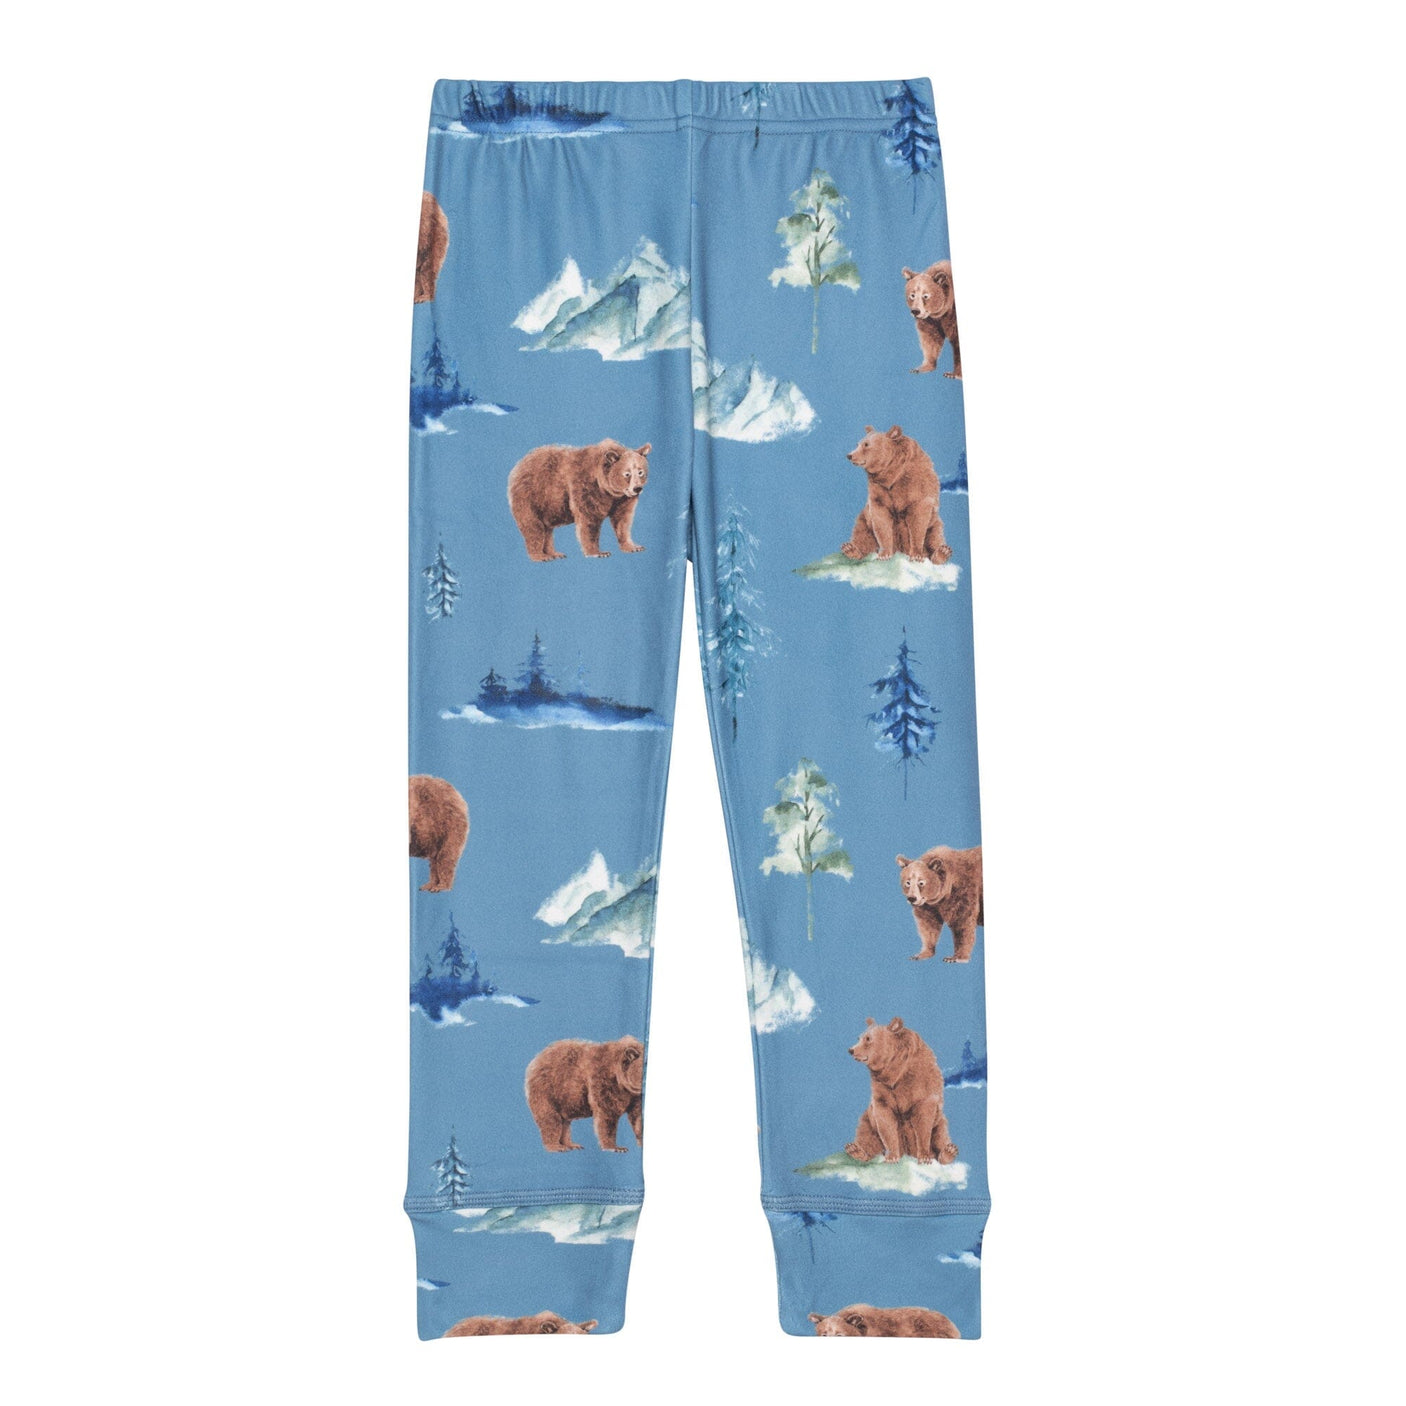 Two Piece Thermal Underwear Set Blue With Bear Print-3